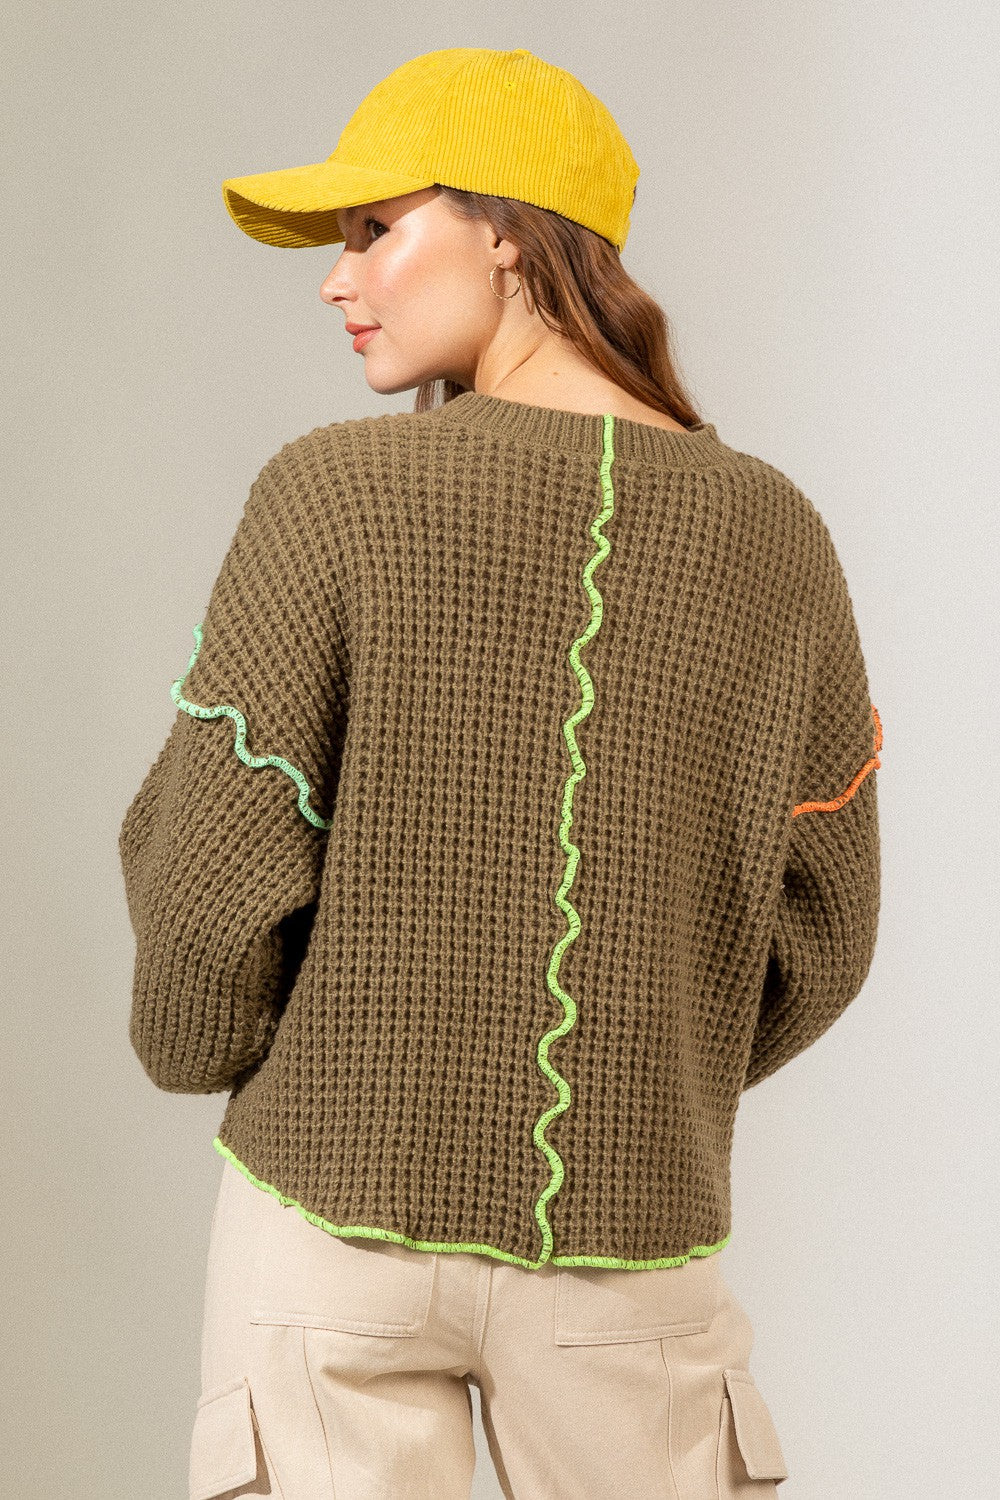 Neon Me Olive Waffle Knit Top